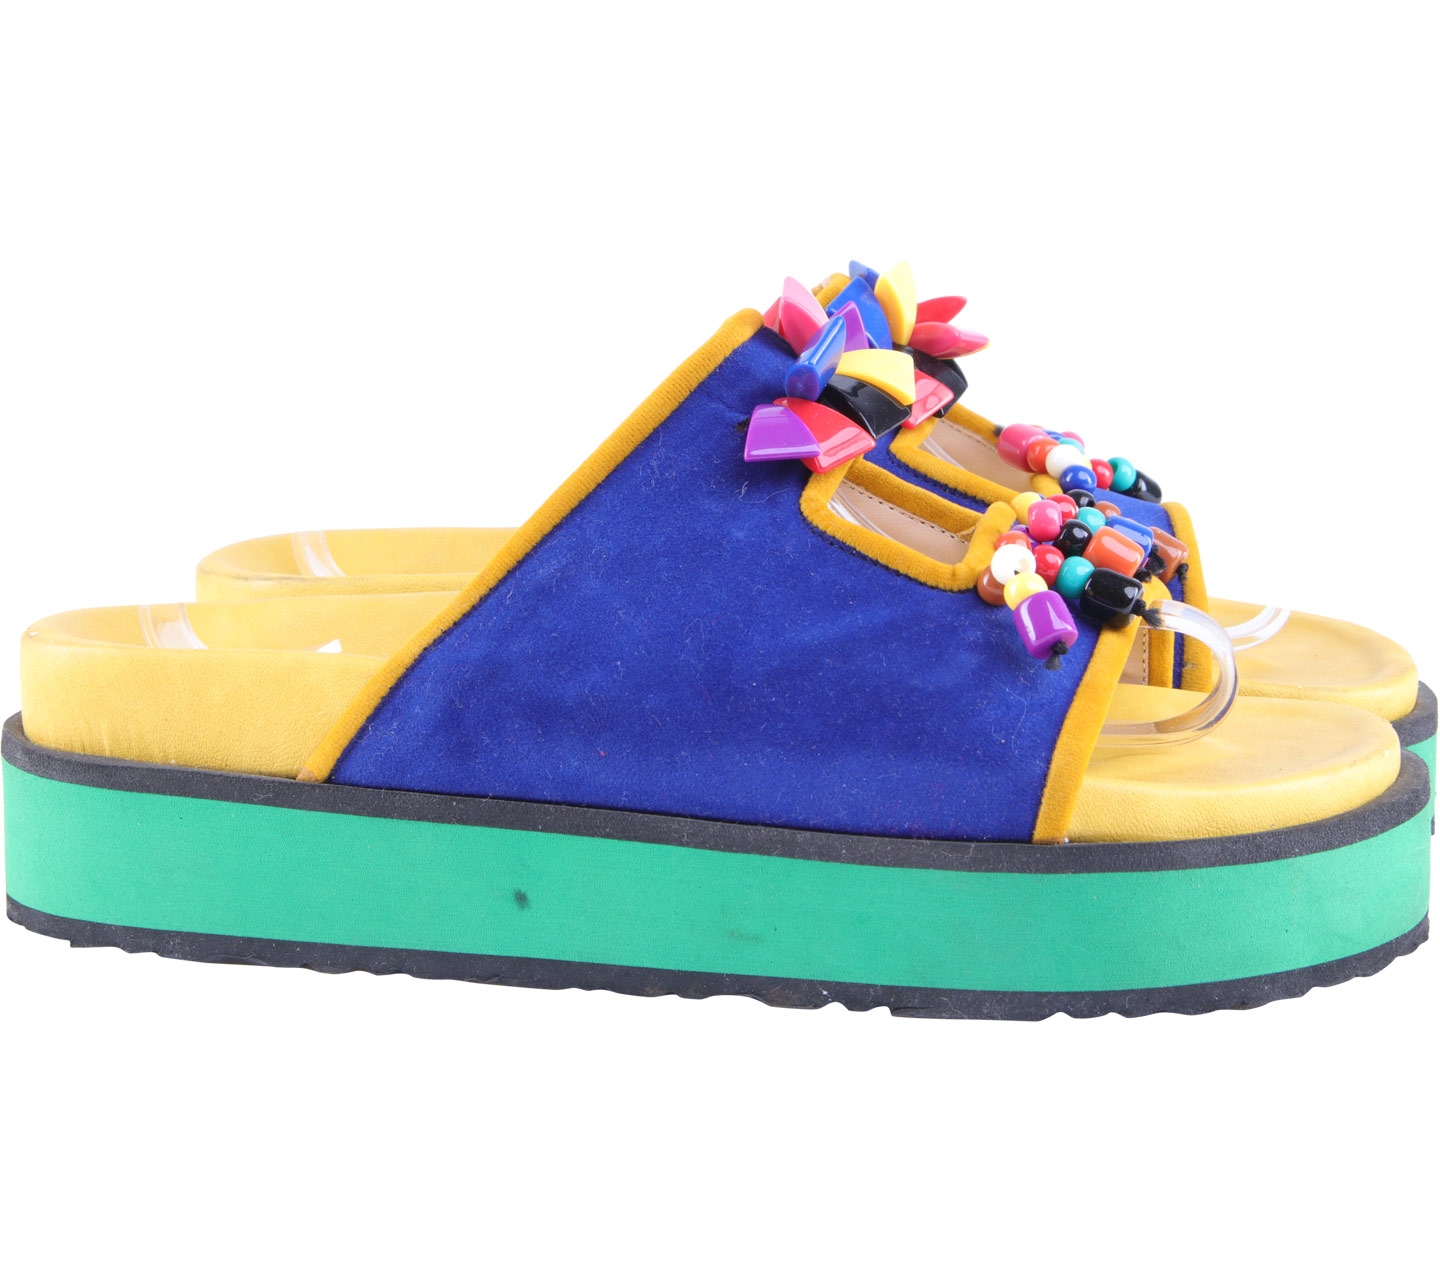 Up Multi Colour Beads Sandals